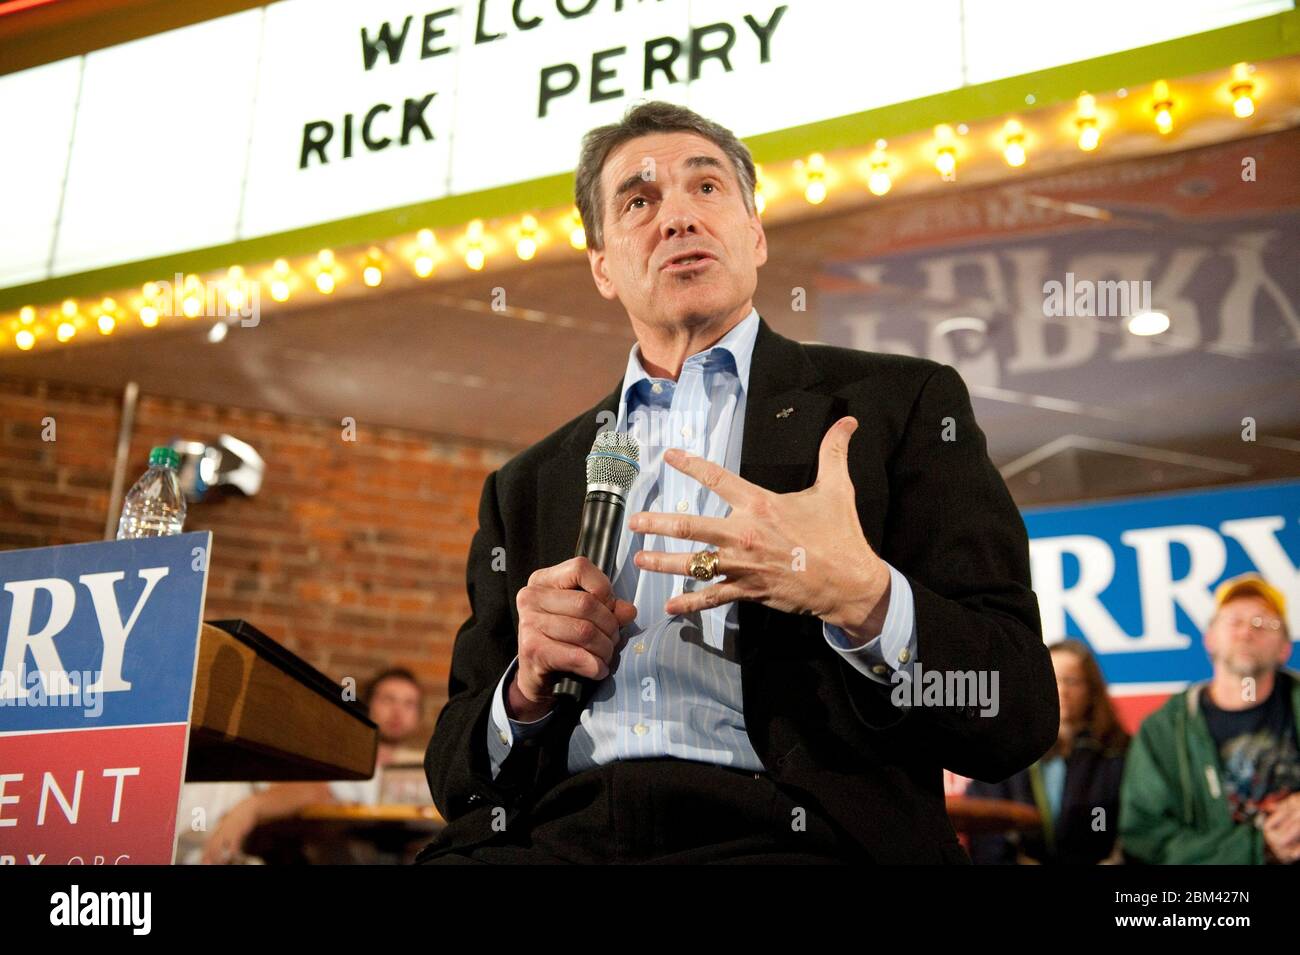 Oskaloosa, Iowa USA, December 26, 2011: Texas Gov. Rick Perry, a candidate for the Republican presidential nomination, makes a final push with Iowa caucus voters during a town hall meeting at the Smokey Row Coffee Shop. Perry is hoping to revive his campaign after steadily falling in most polls since several gaffes derailed his efforts to remain a top contender in the Republican primary. ©Bob Daemmrich Stock Photo